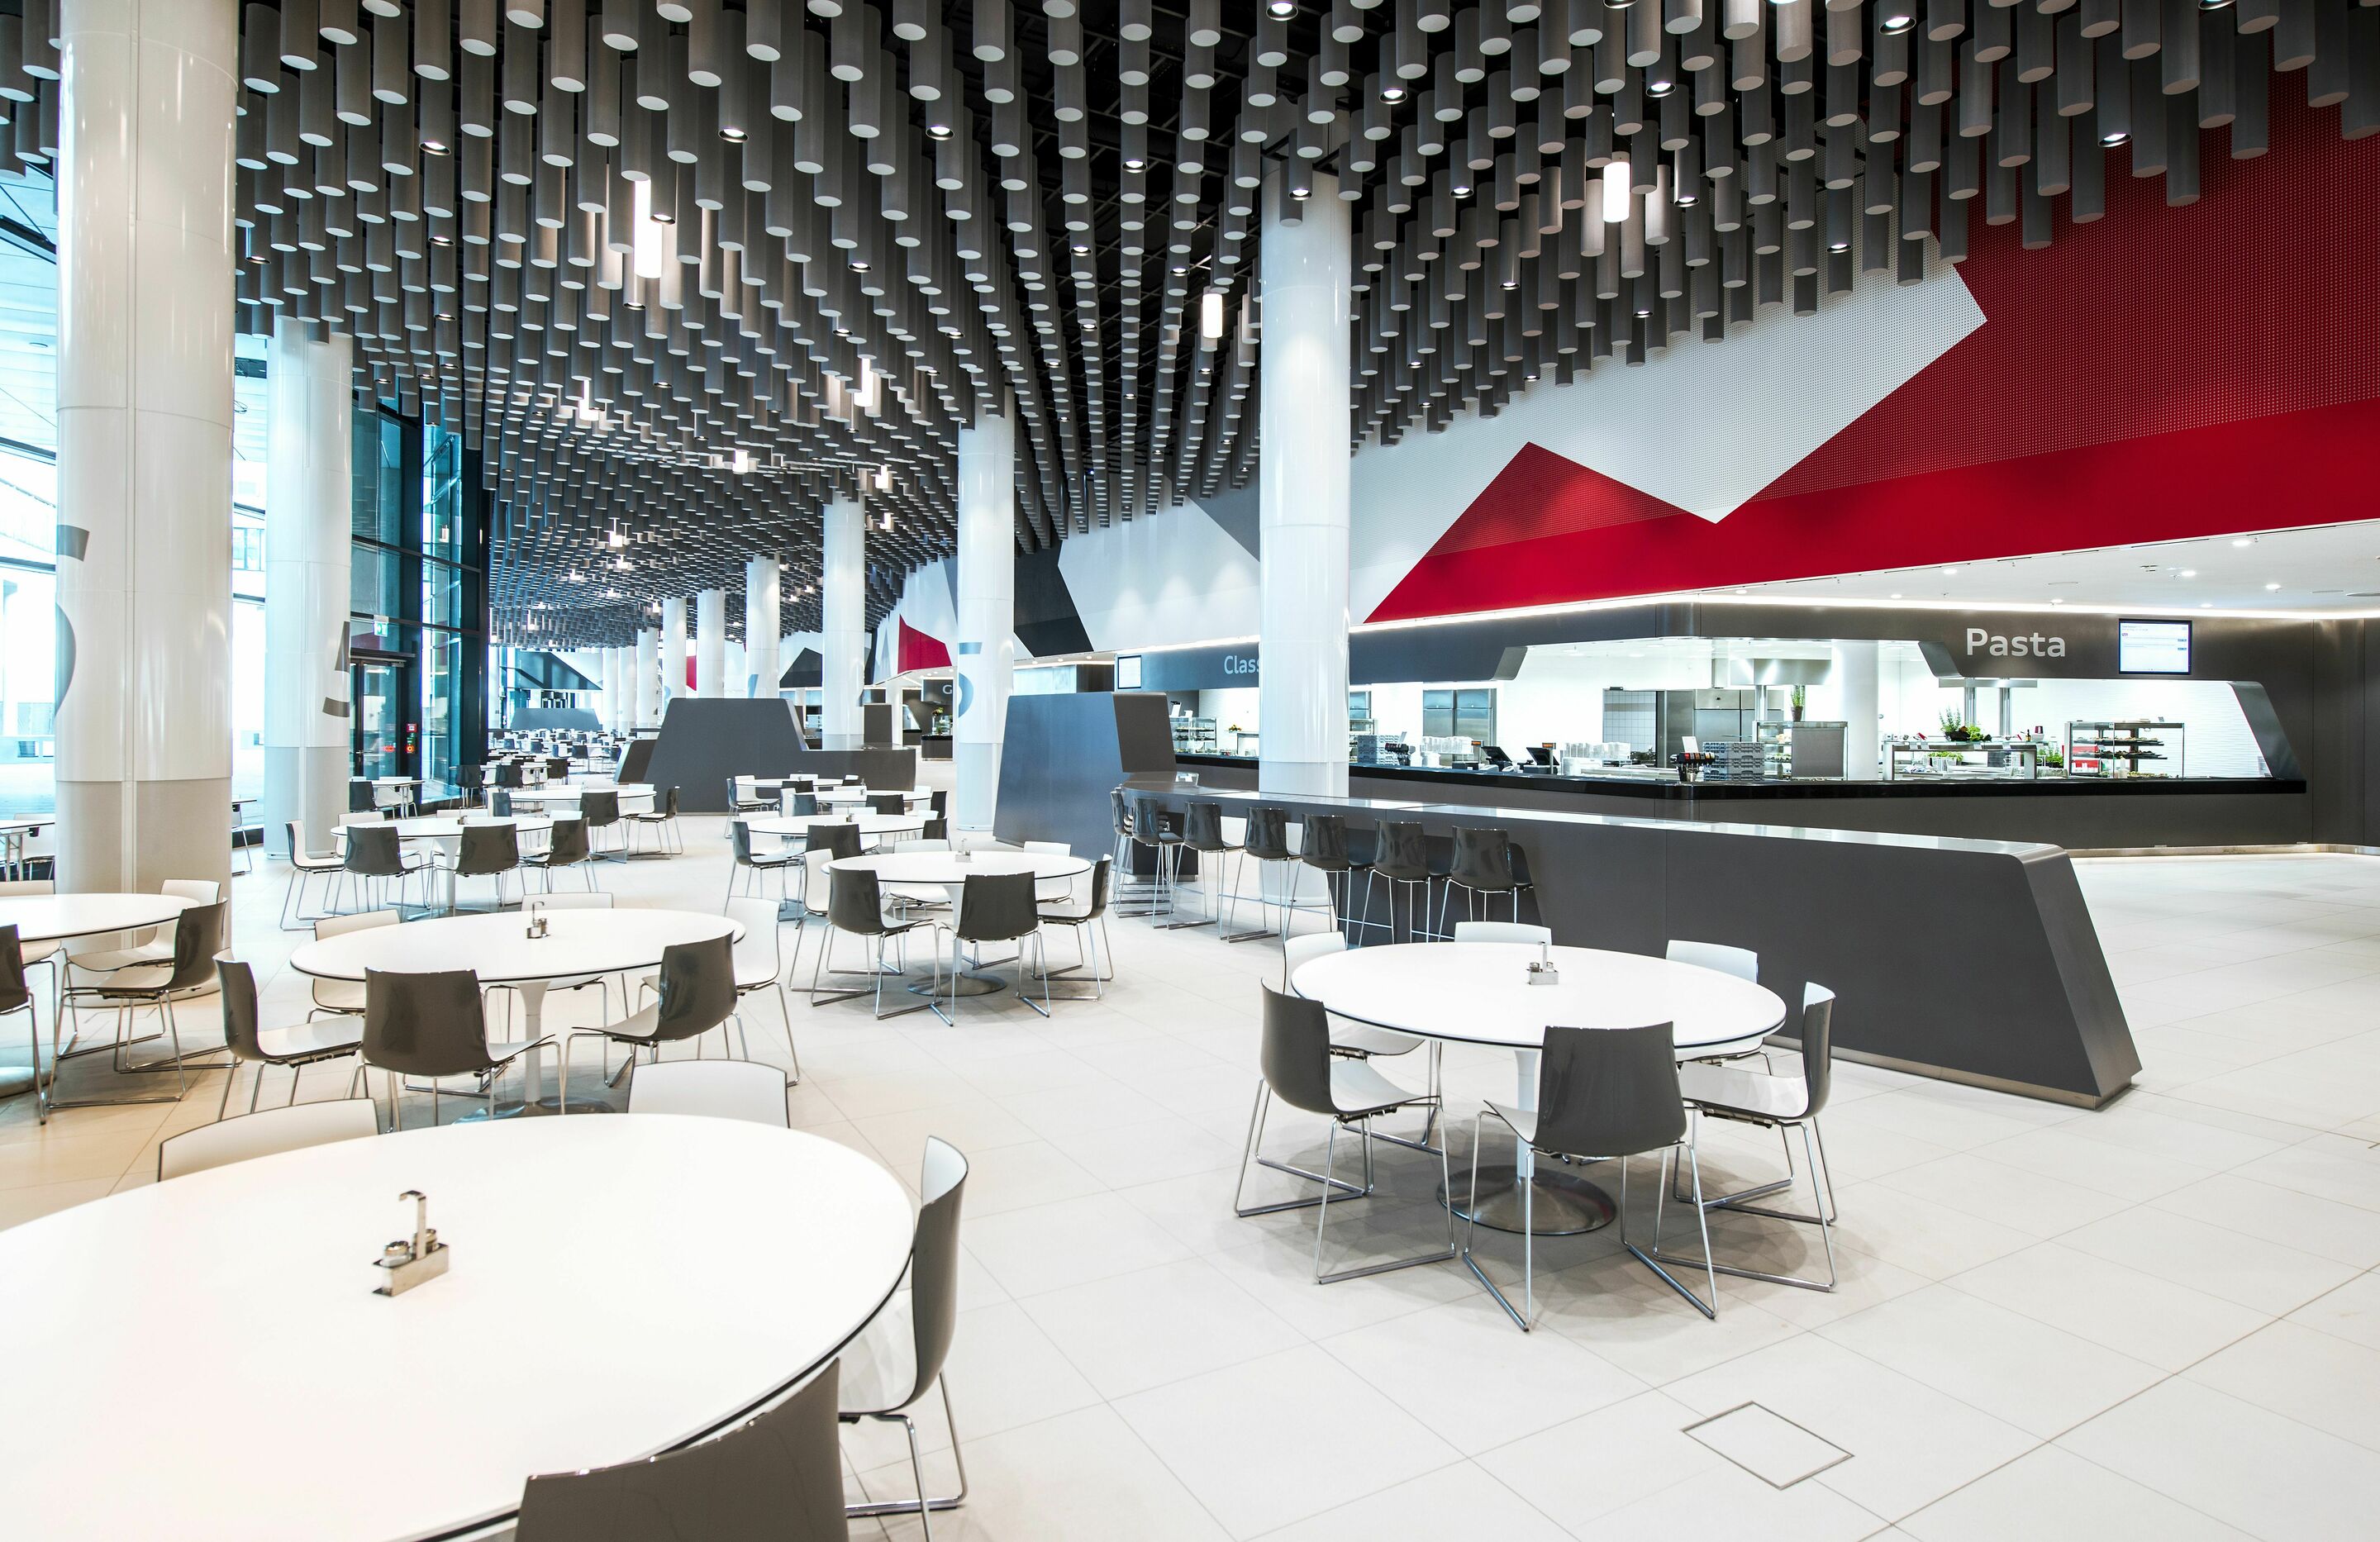 Sustainability in Audi’s gastronomy services: “We want to make a good choice easy”